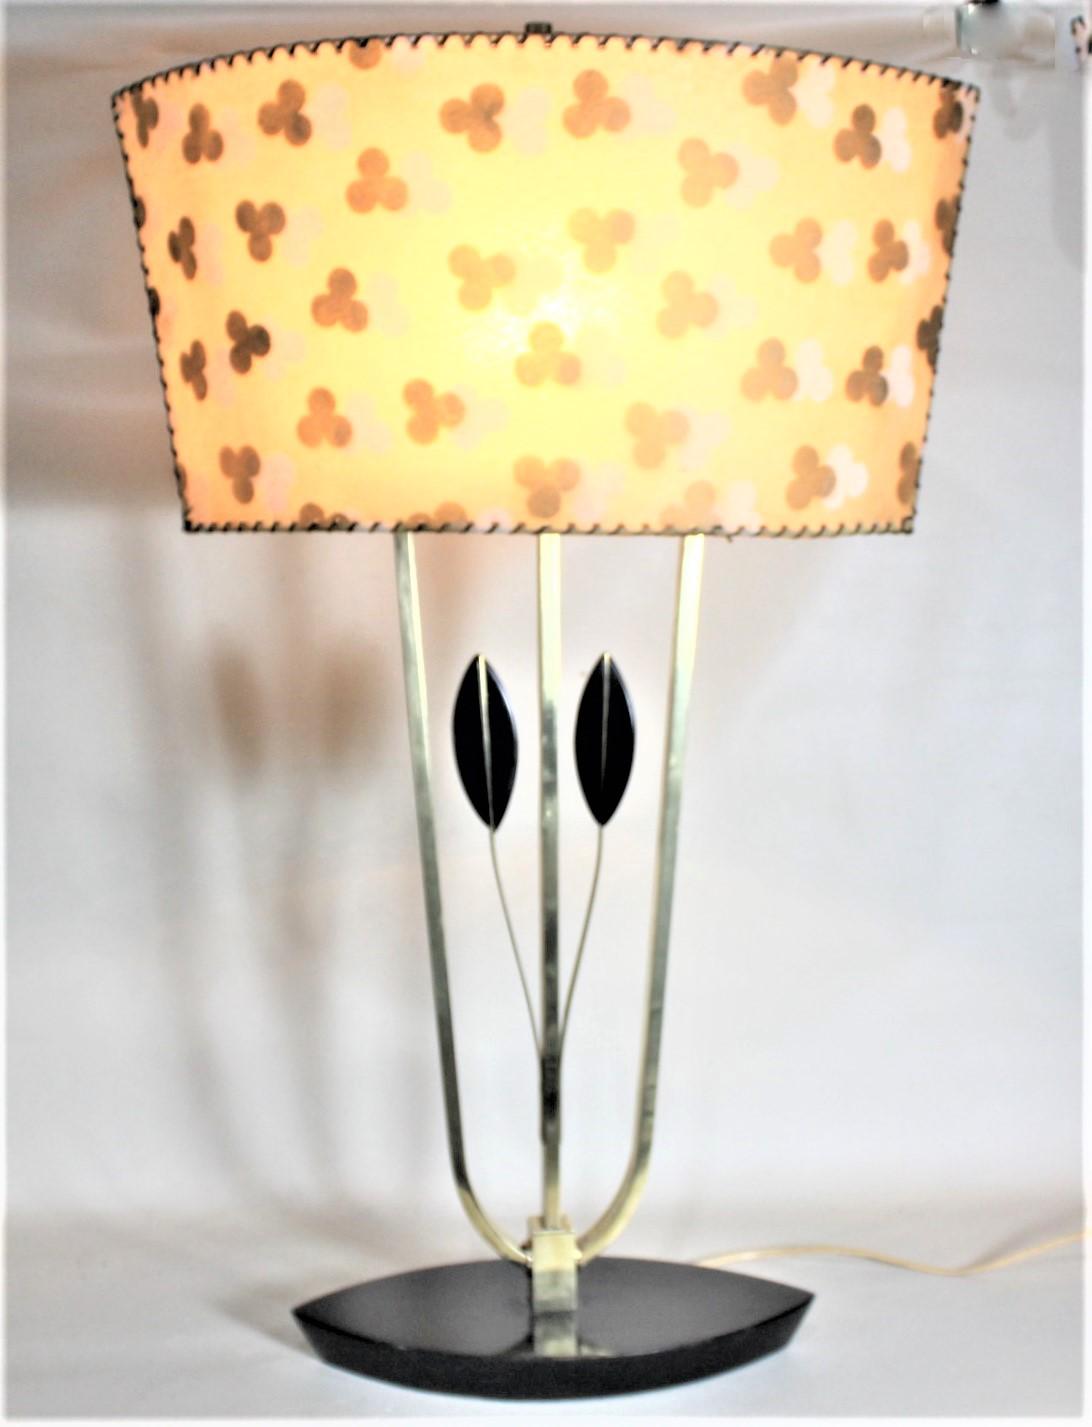 This Mid-Century Modern table lamp is unsigned but consistent with the lamps produced by the Rembrandt Lamp Company of the United States in circa 1965. The lamp is composed of solid brass and wood which has a lacquered black contrasting finish and a